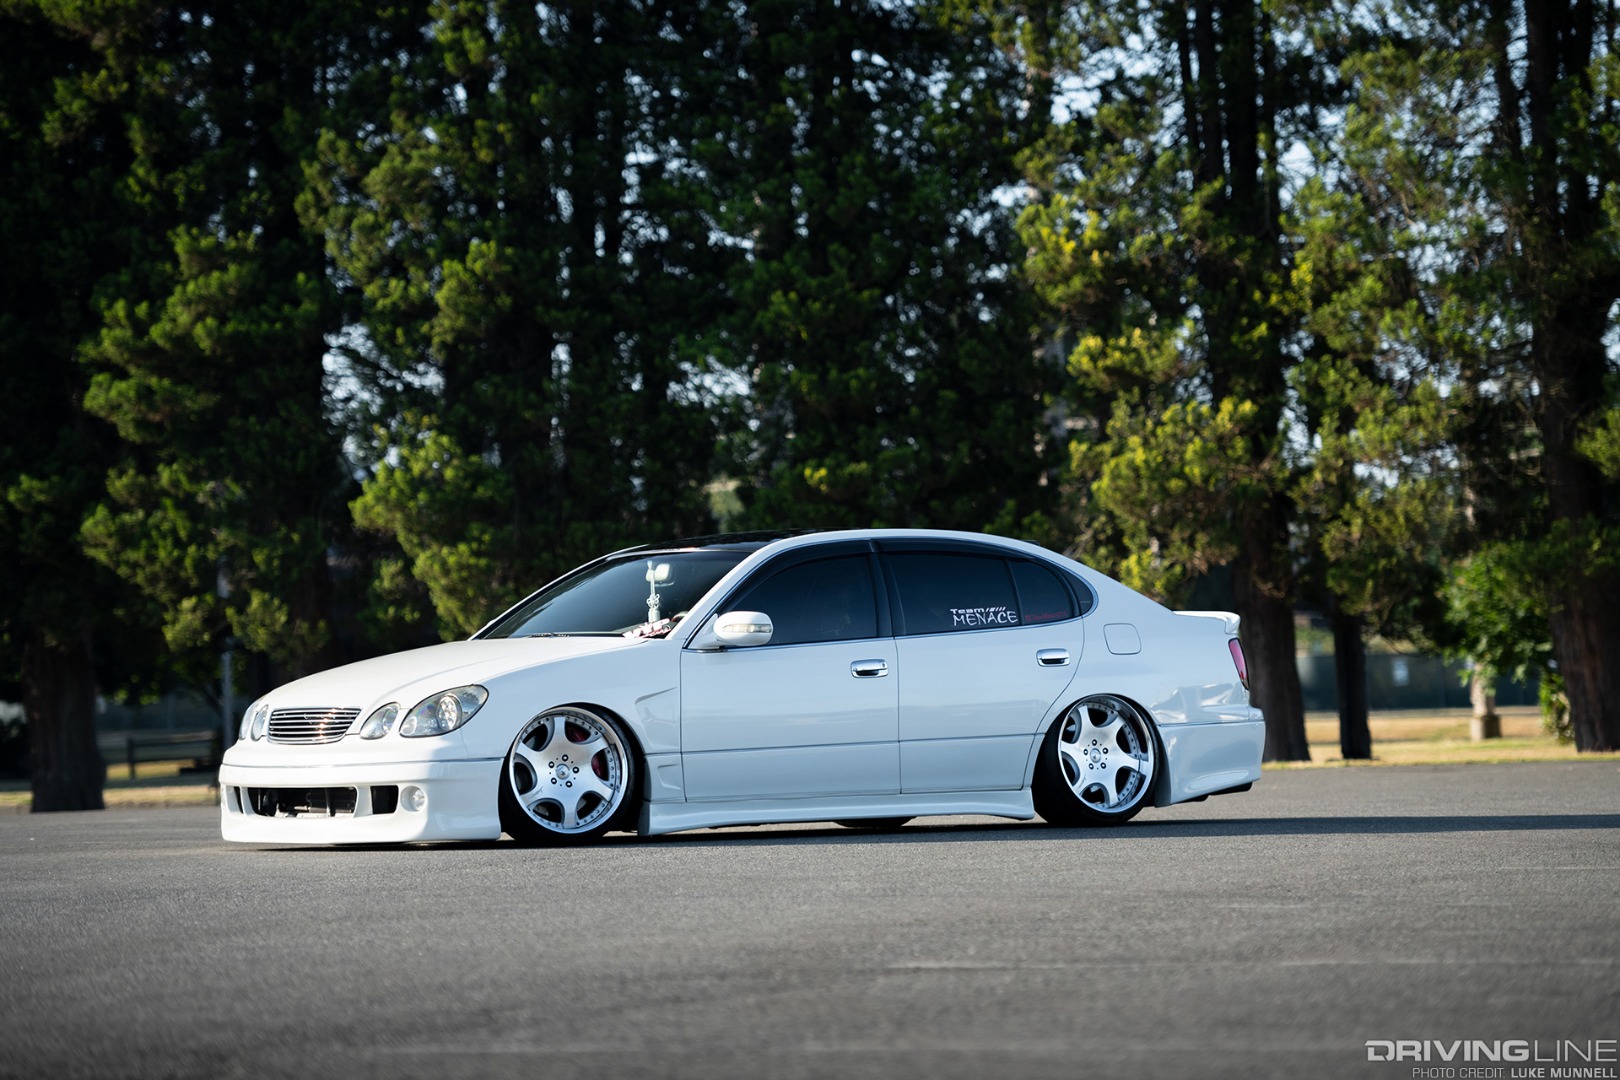 First of its kind in the PNW: VIP Style Lexus GS300.